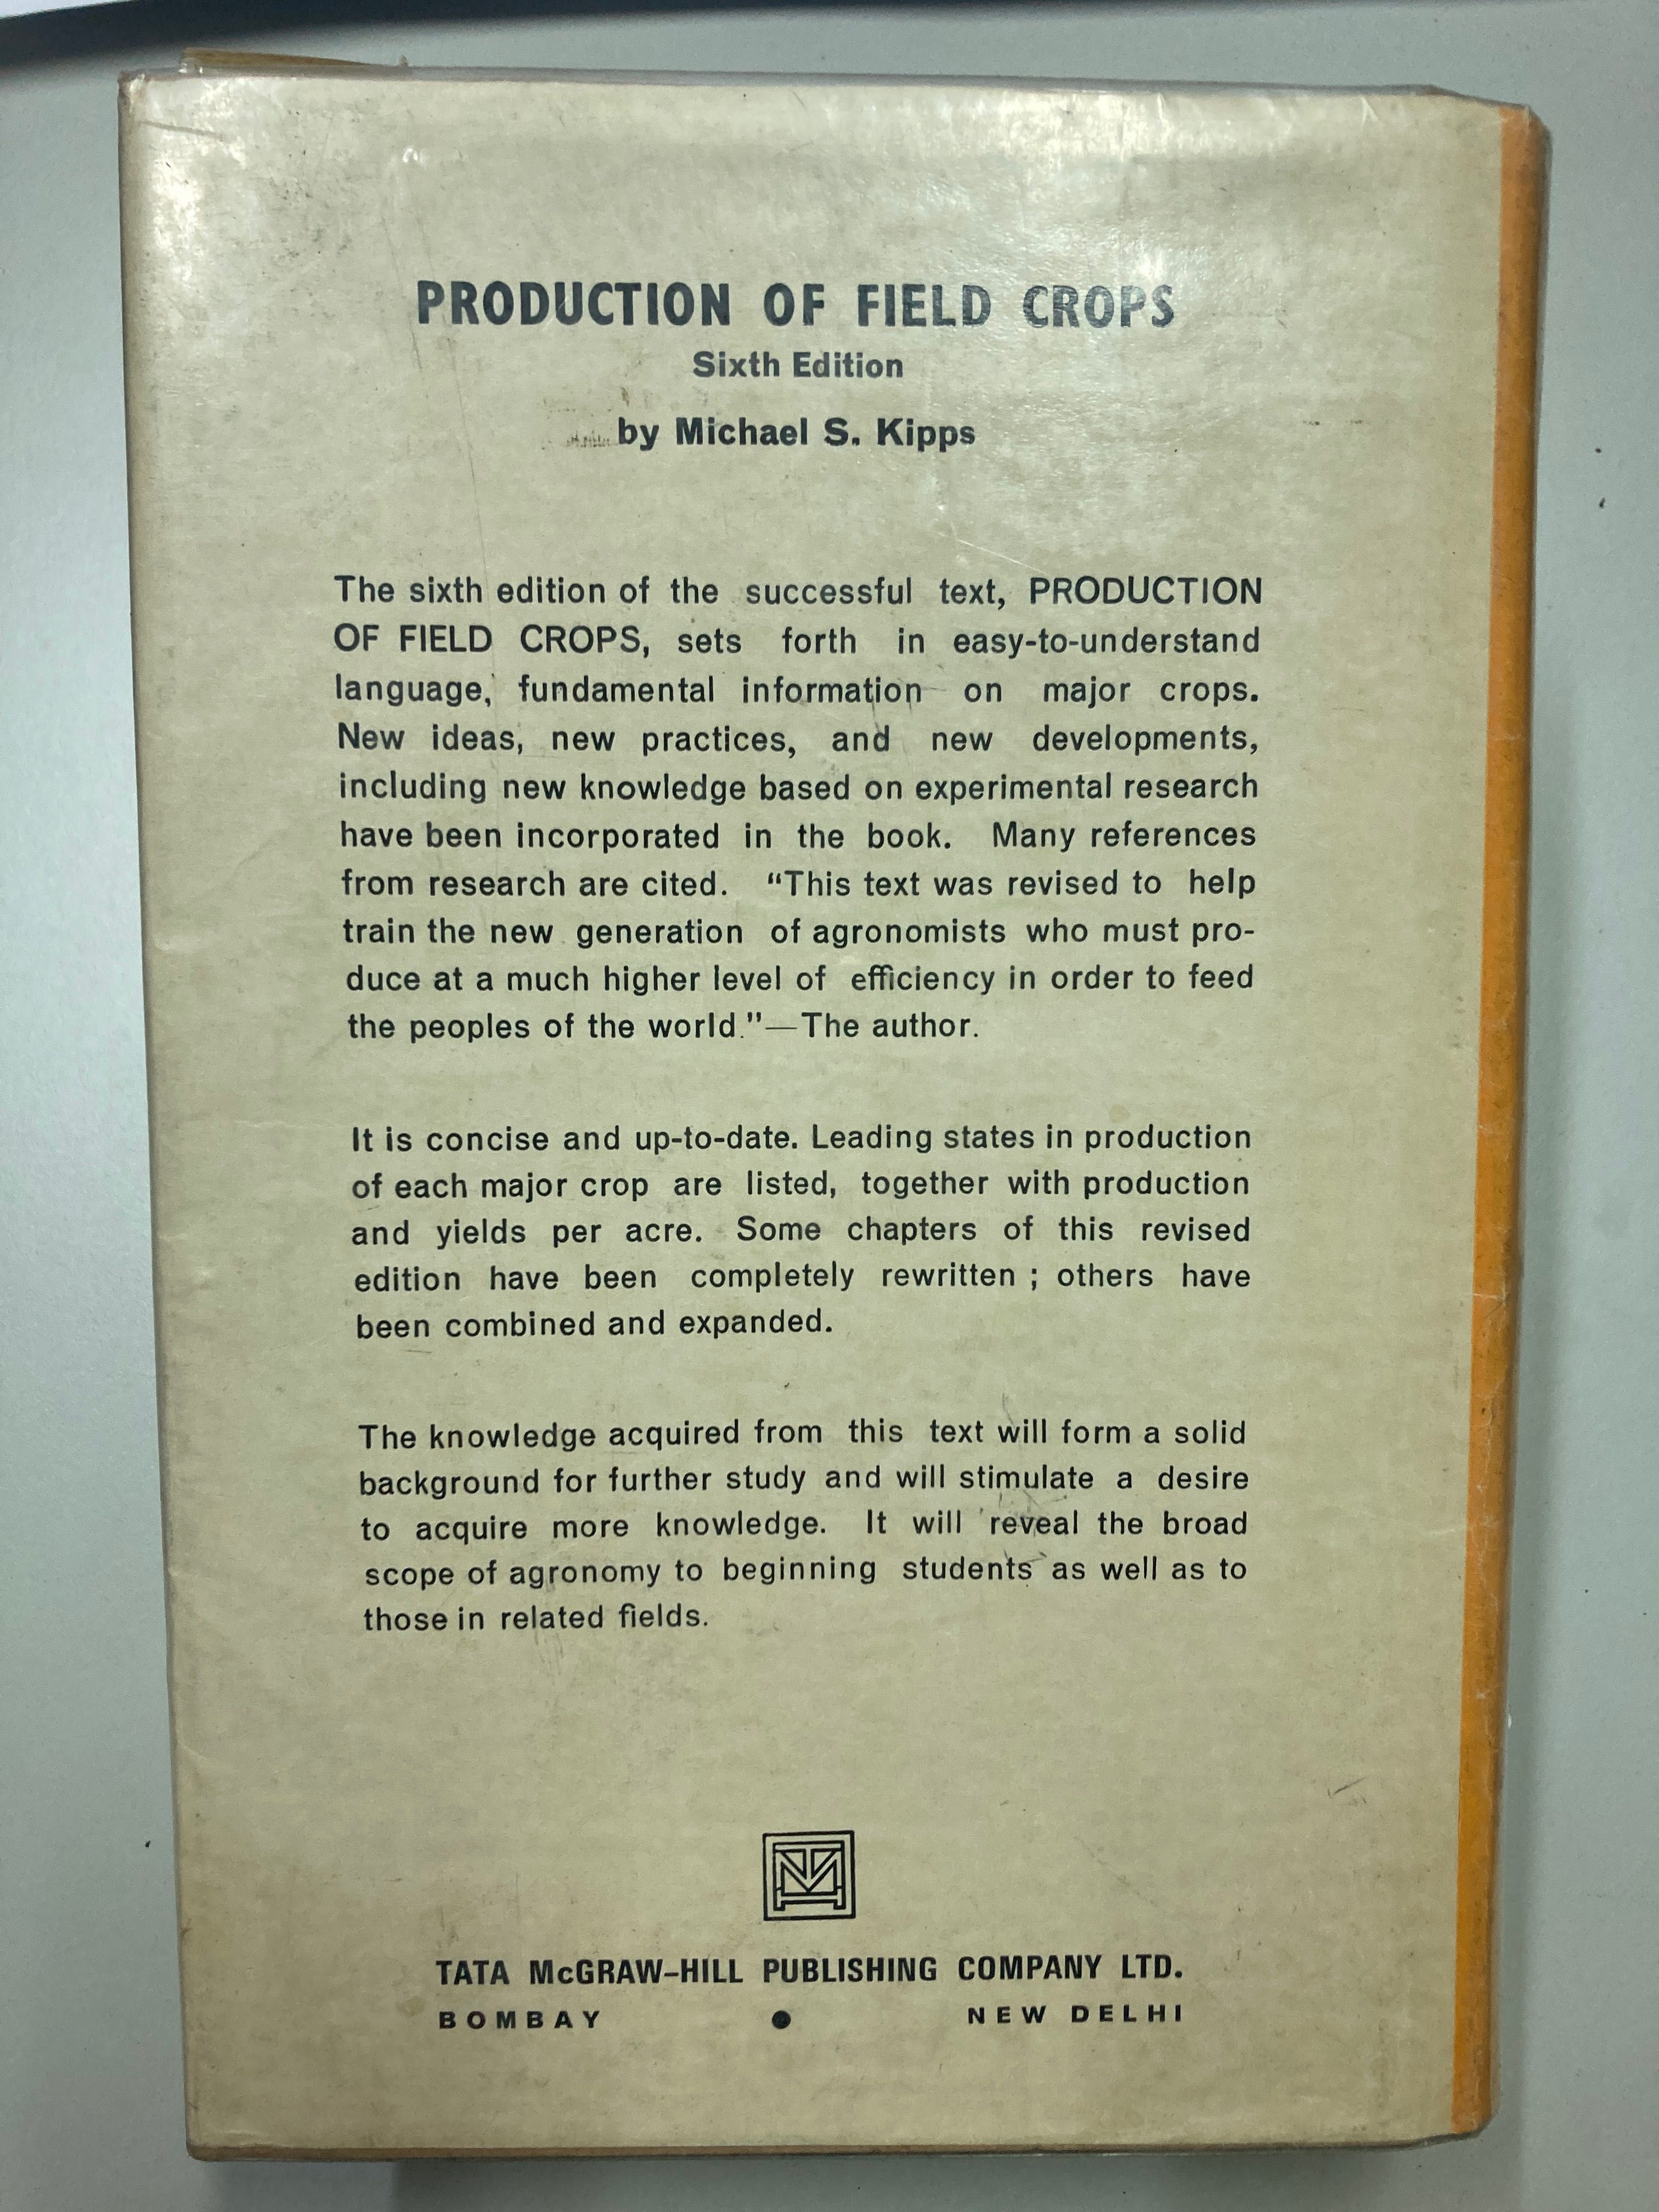 Production of field crops.